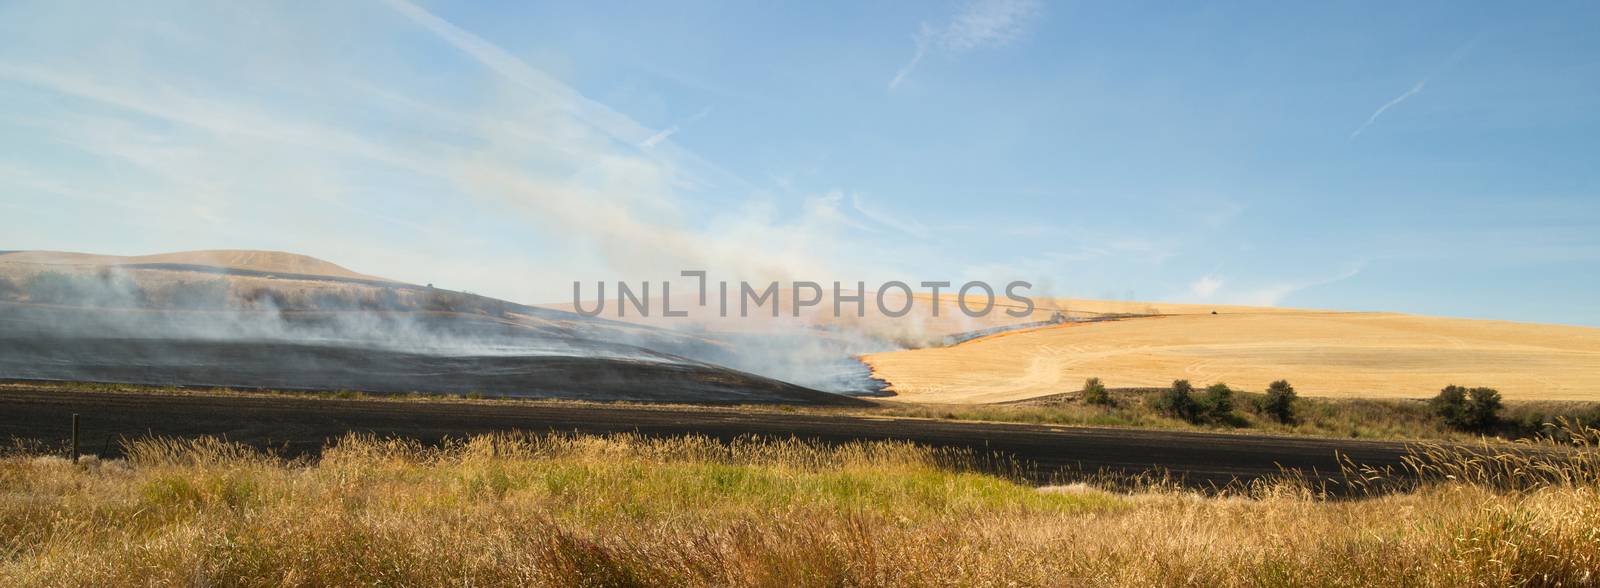 Agriculture Farming Burns Plant Stalks Harvest Fire Tractor by ChrisBoswell